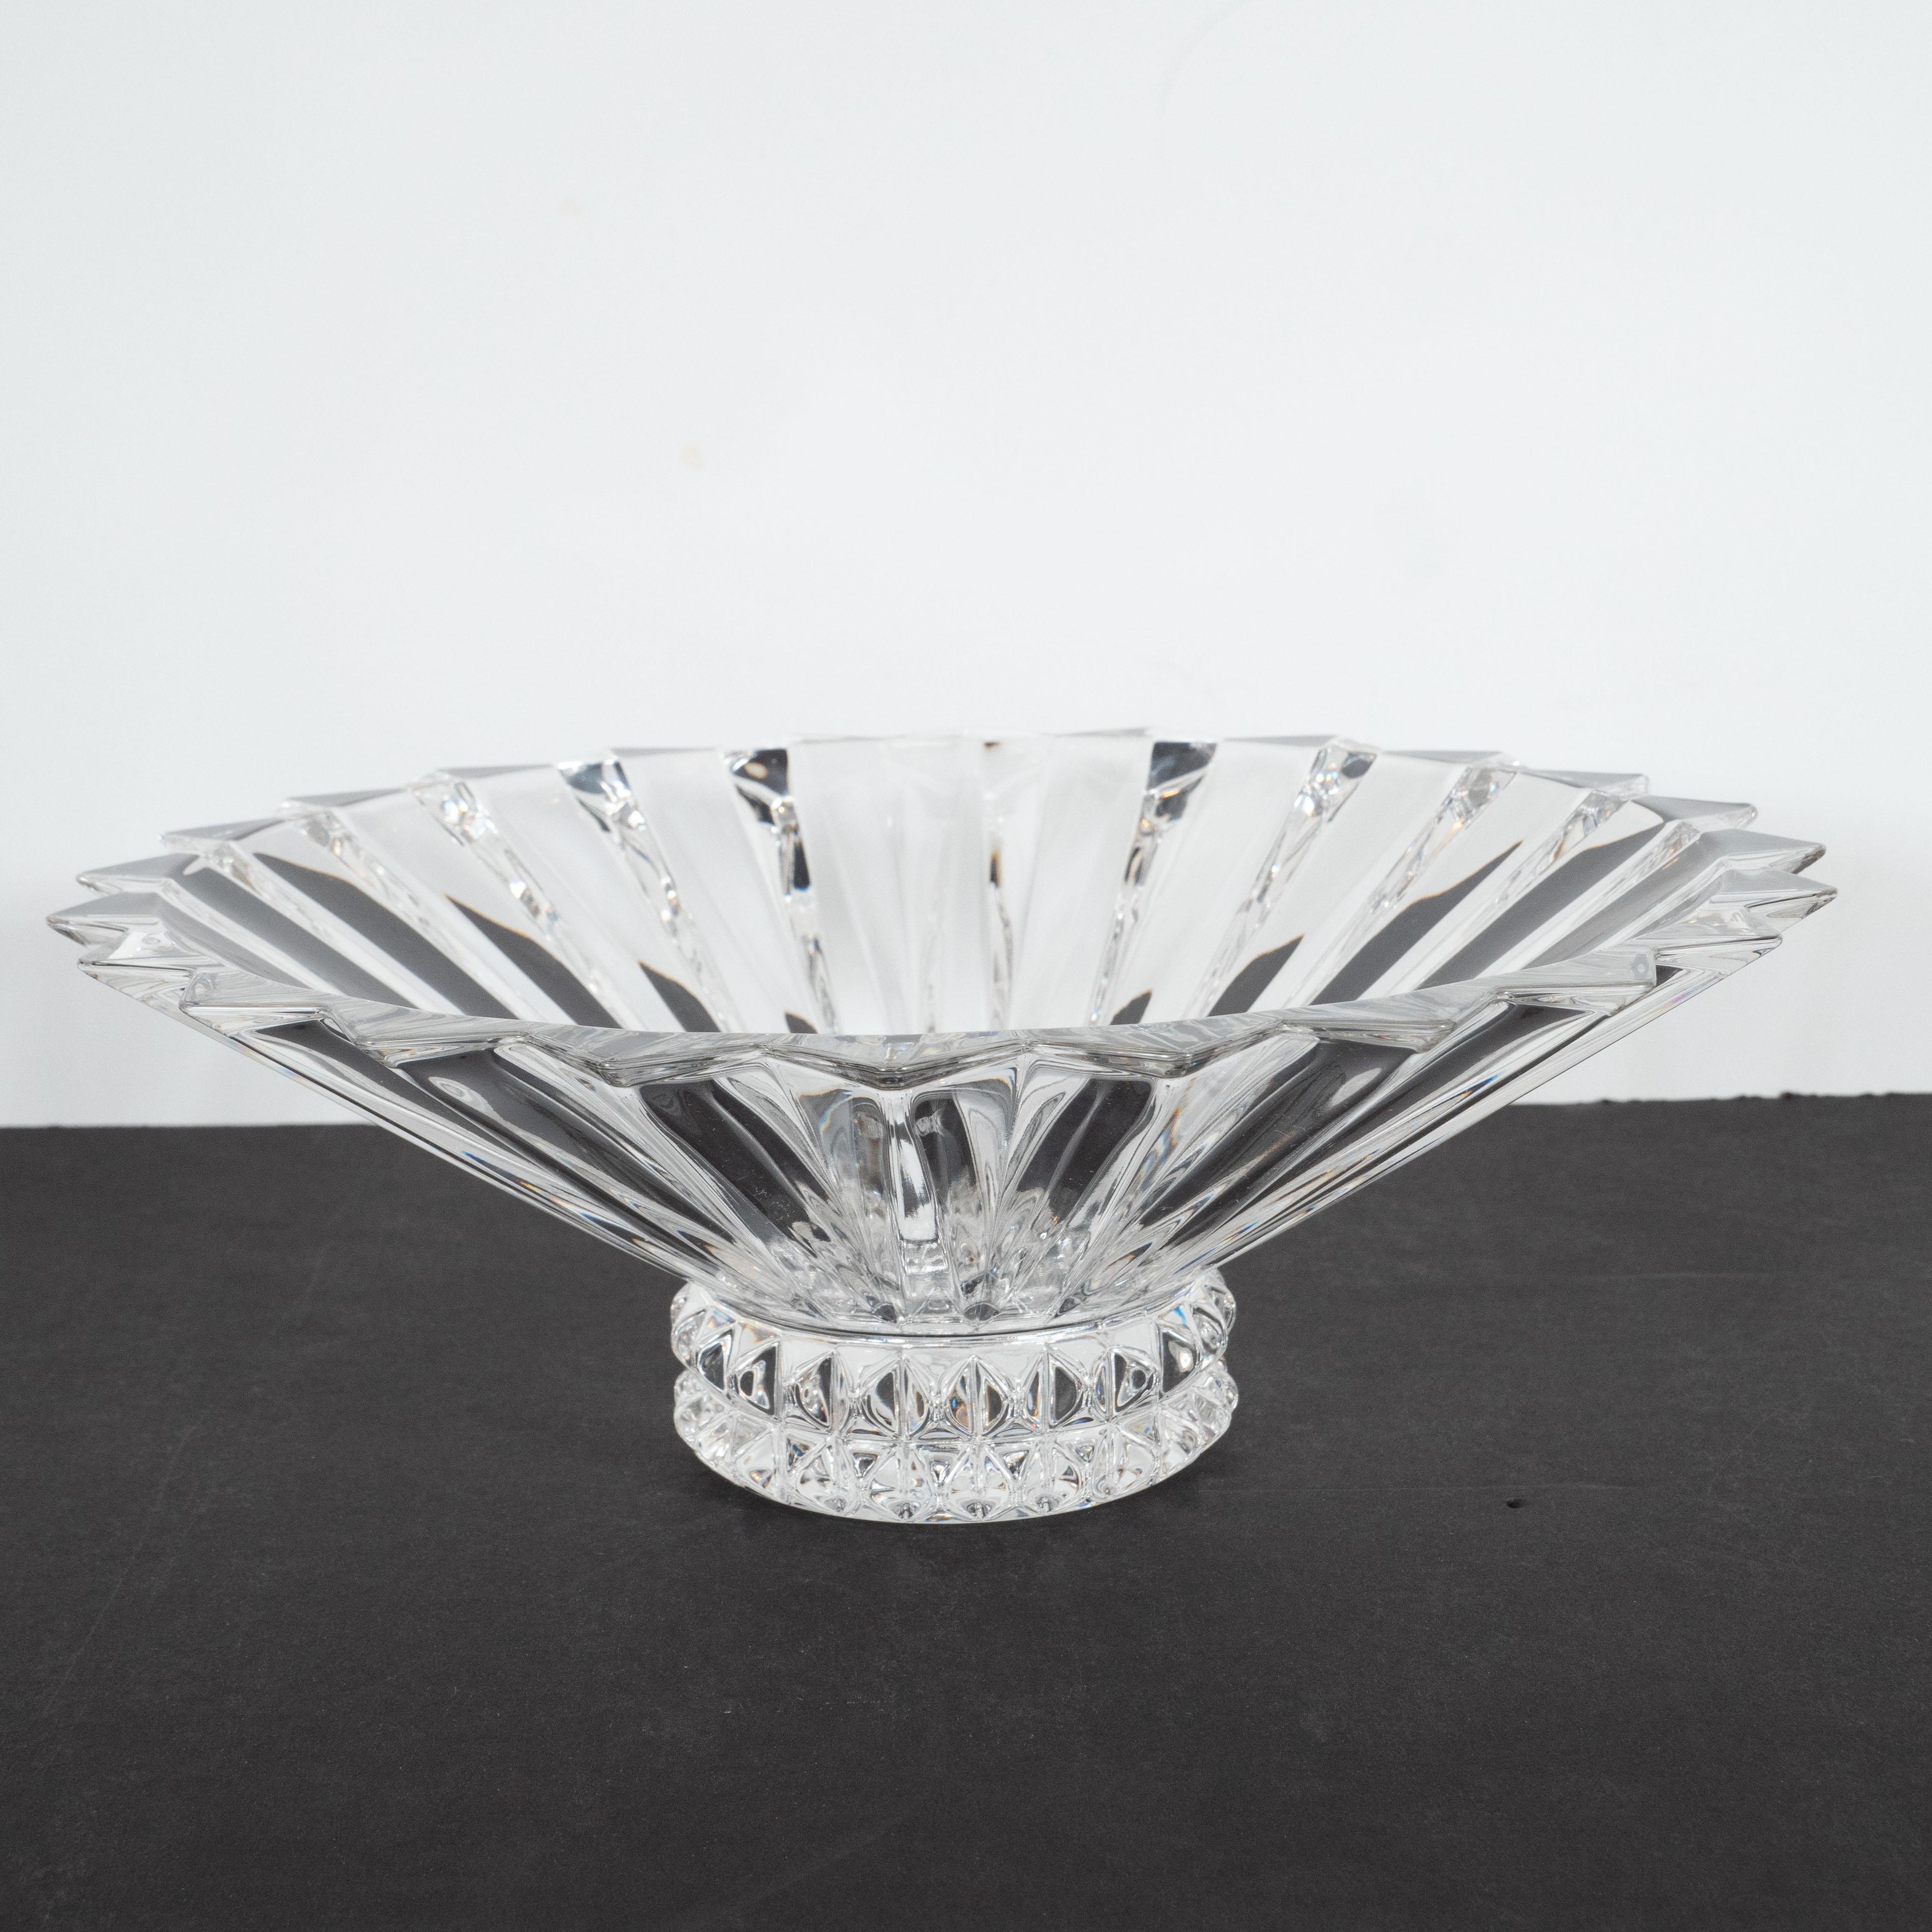 Late 20th Century Mid-Century Modern Crystal Centerpiece Bowl with Geometric Designs by Rosenthal